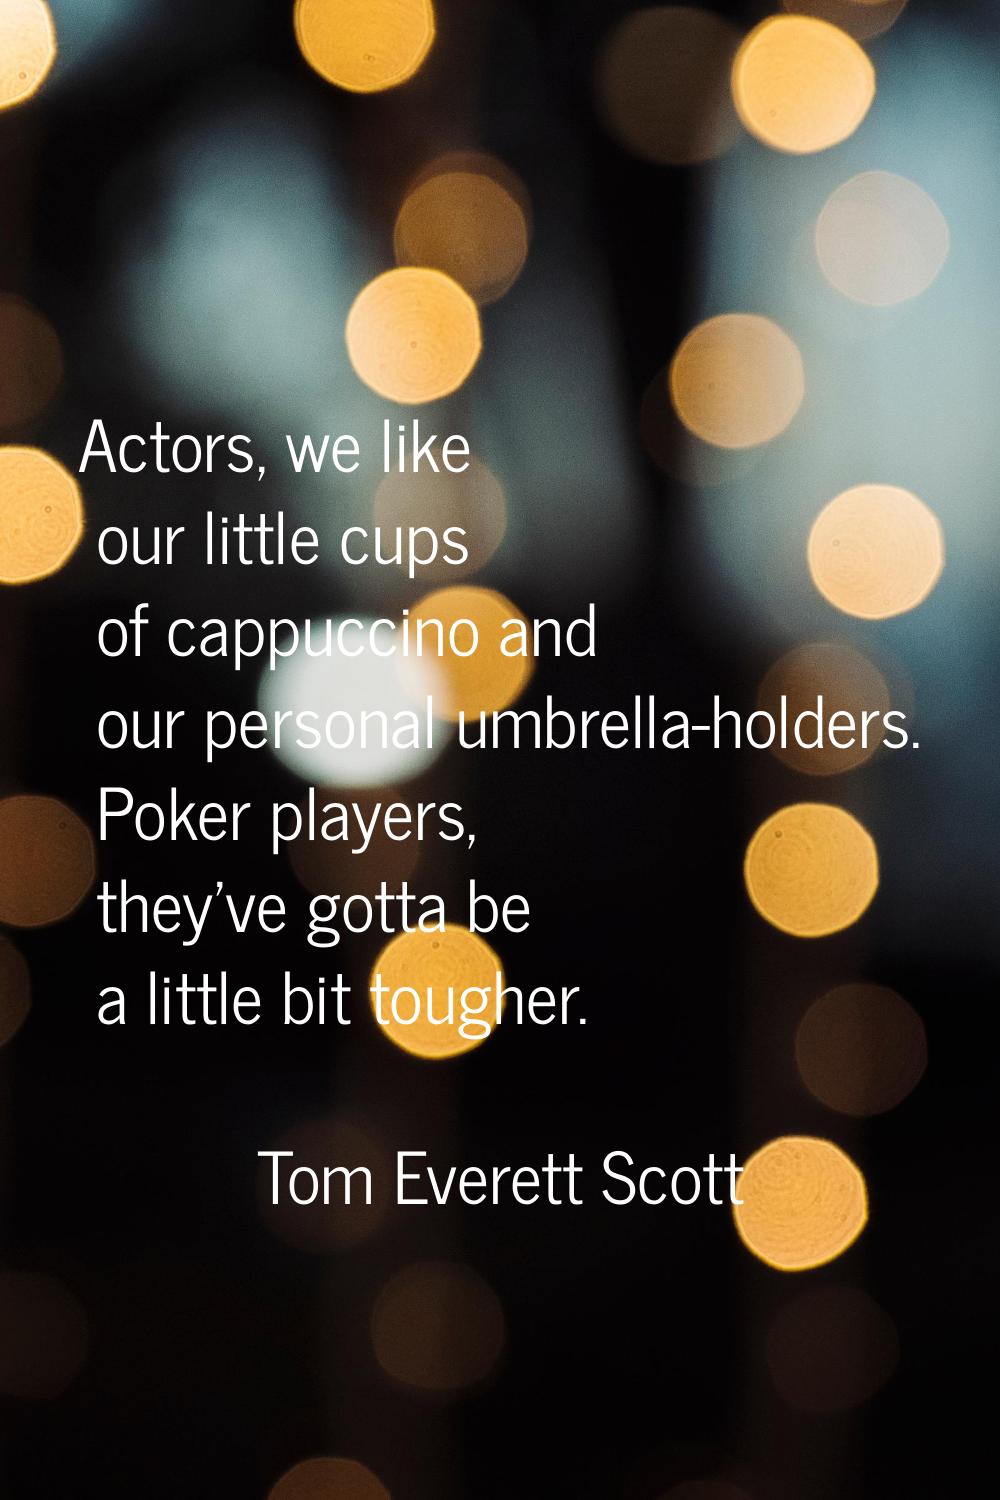 Actors, we like our little cups of cappuccino and our personal umbrella-holders. Poker players, the